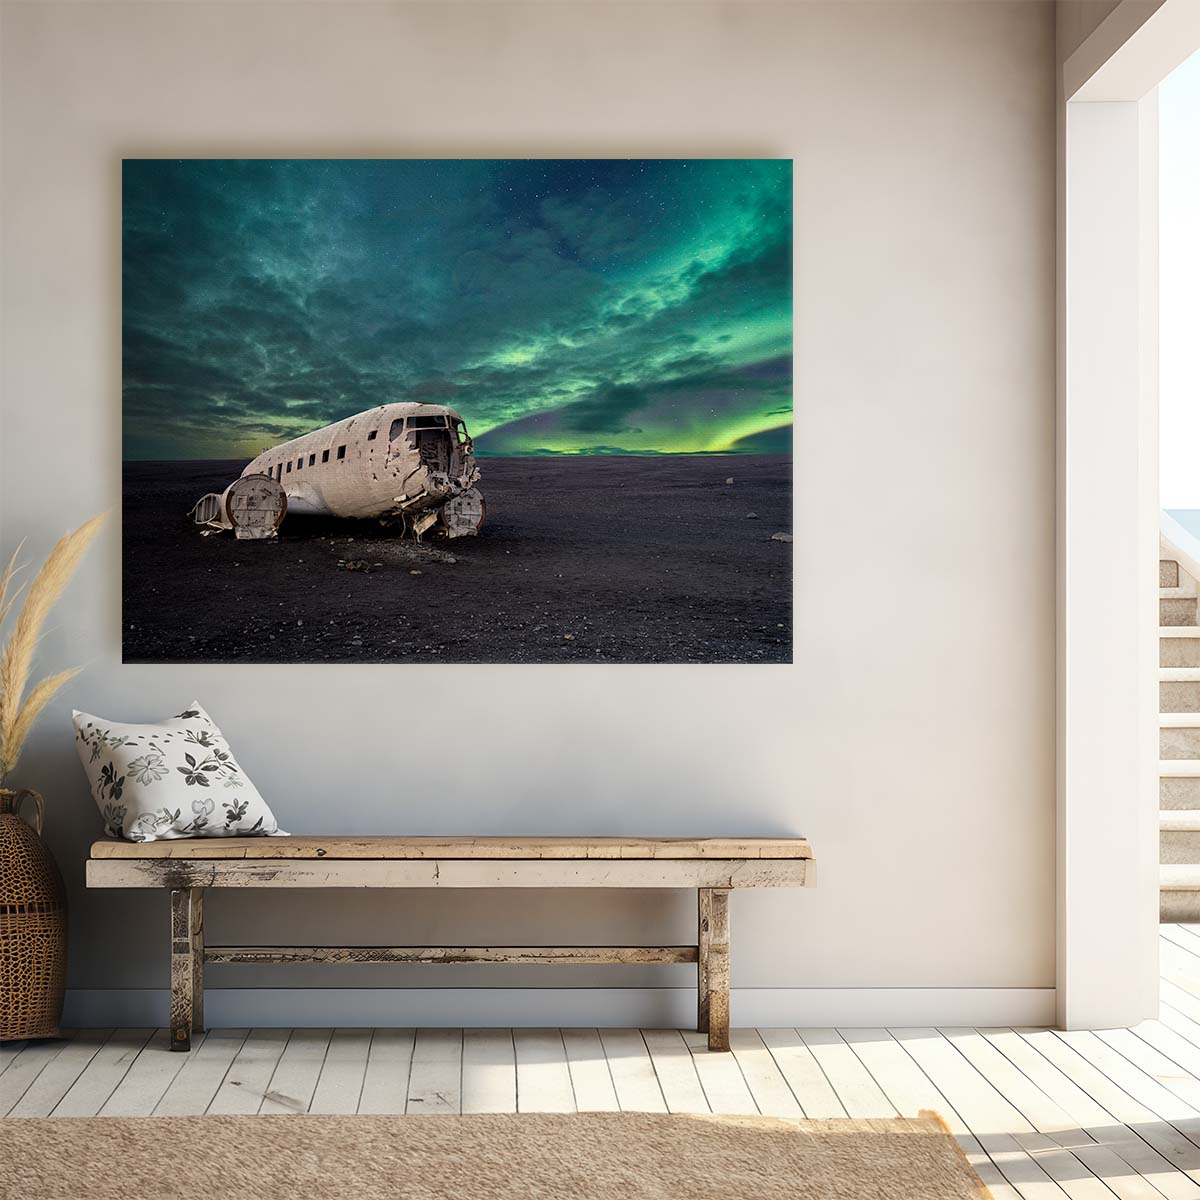 Aurora Borealis & Abandoned DC-3 Wreck in Iceland Wall Art